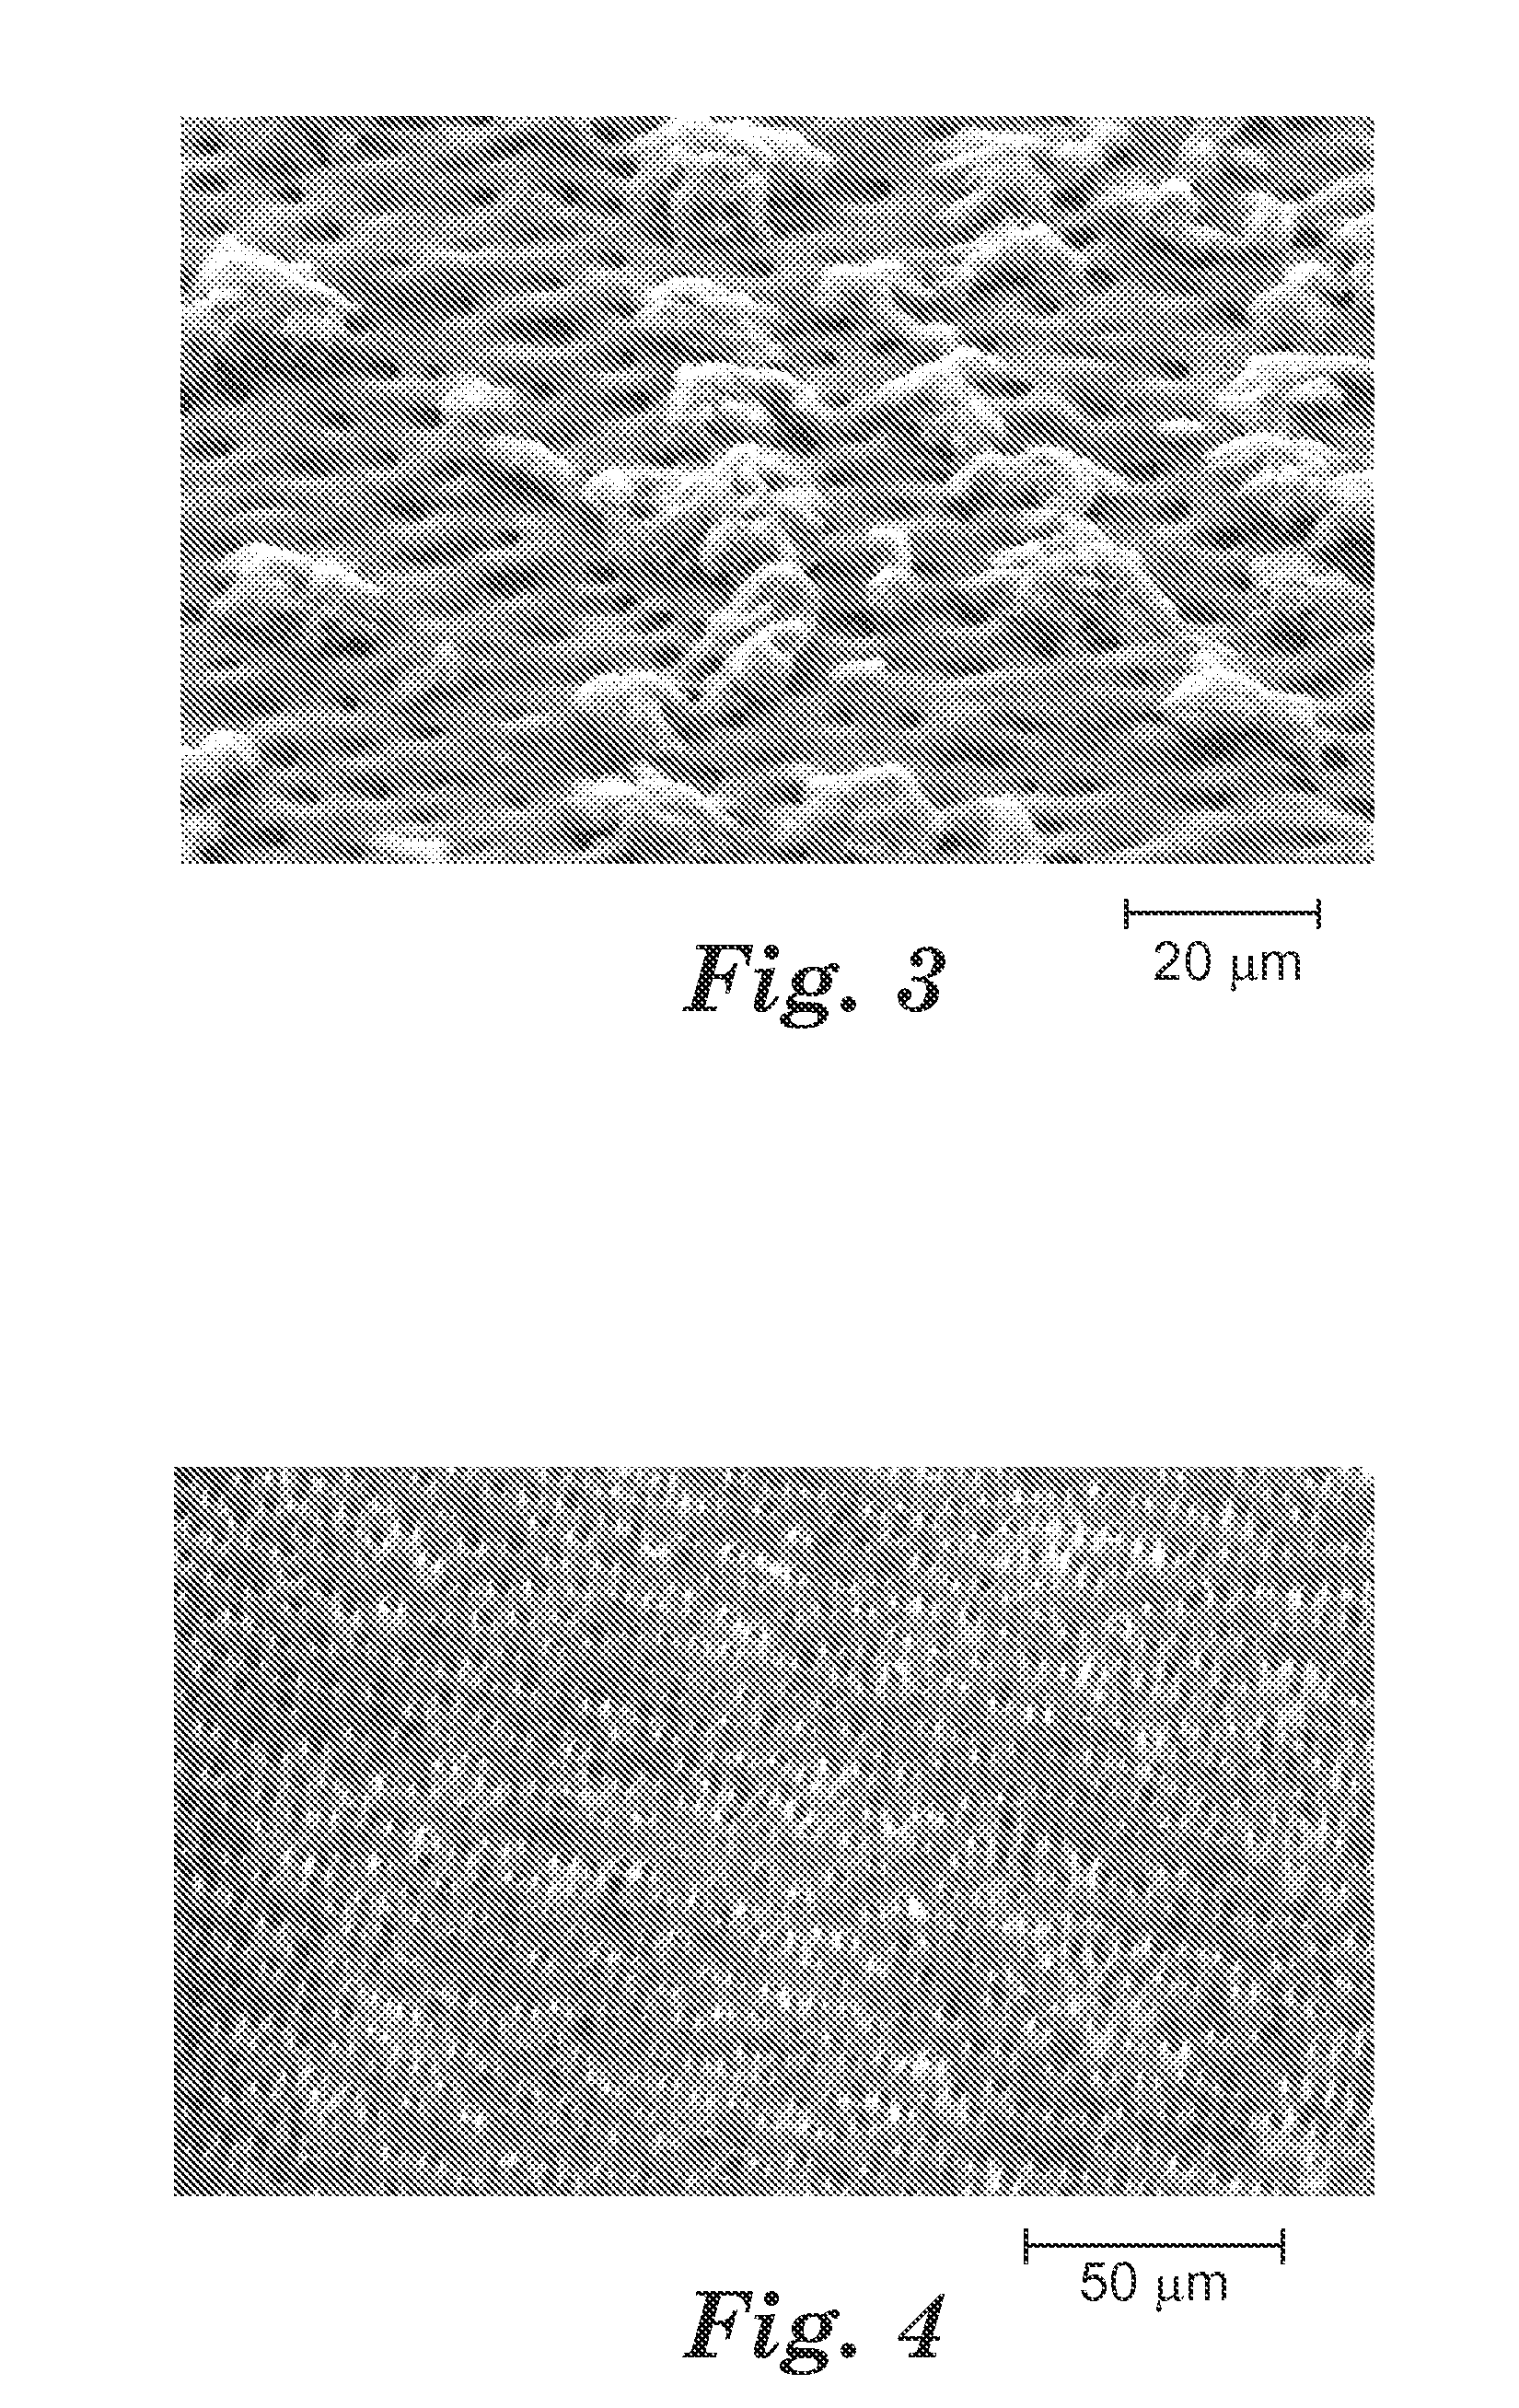 Remineralizing compositions and methods